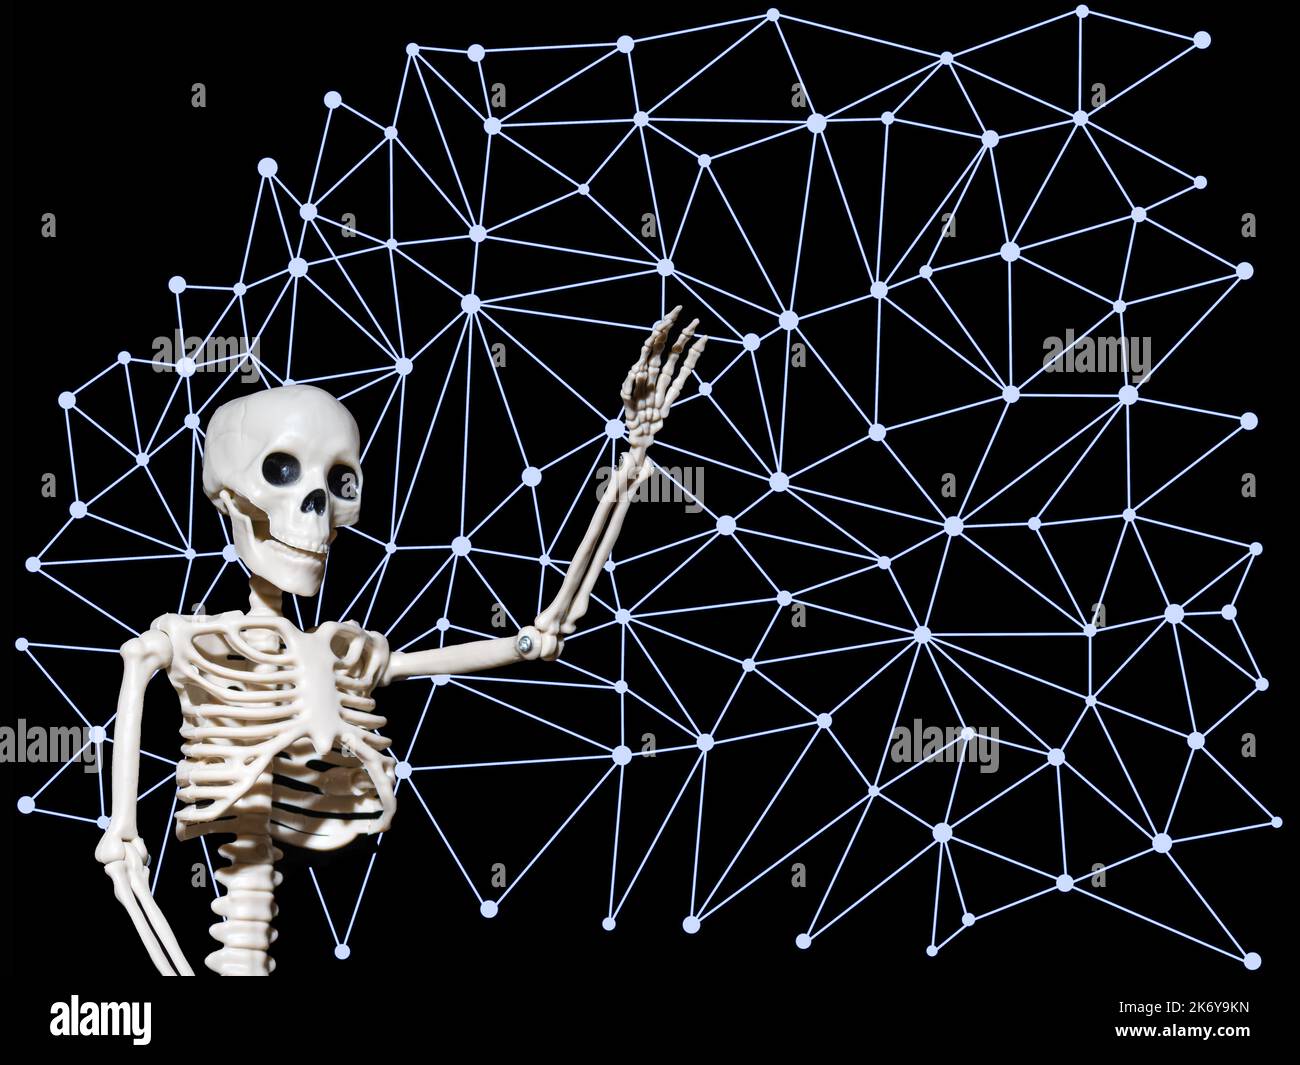 Business network communications and innovative technologies. The human skeleton indicates a virtual holographic connection on a black background. Inno Stock Photo